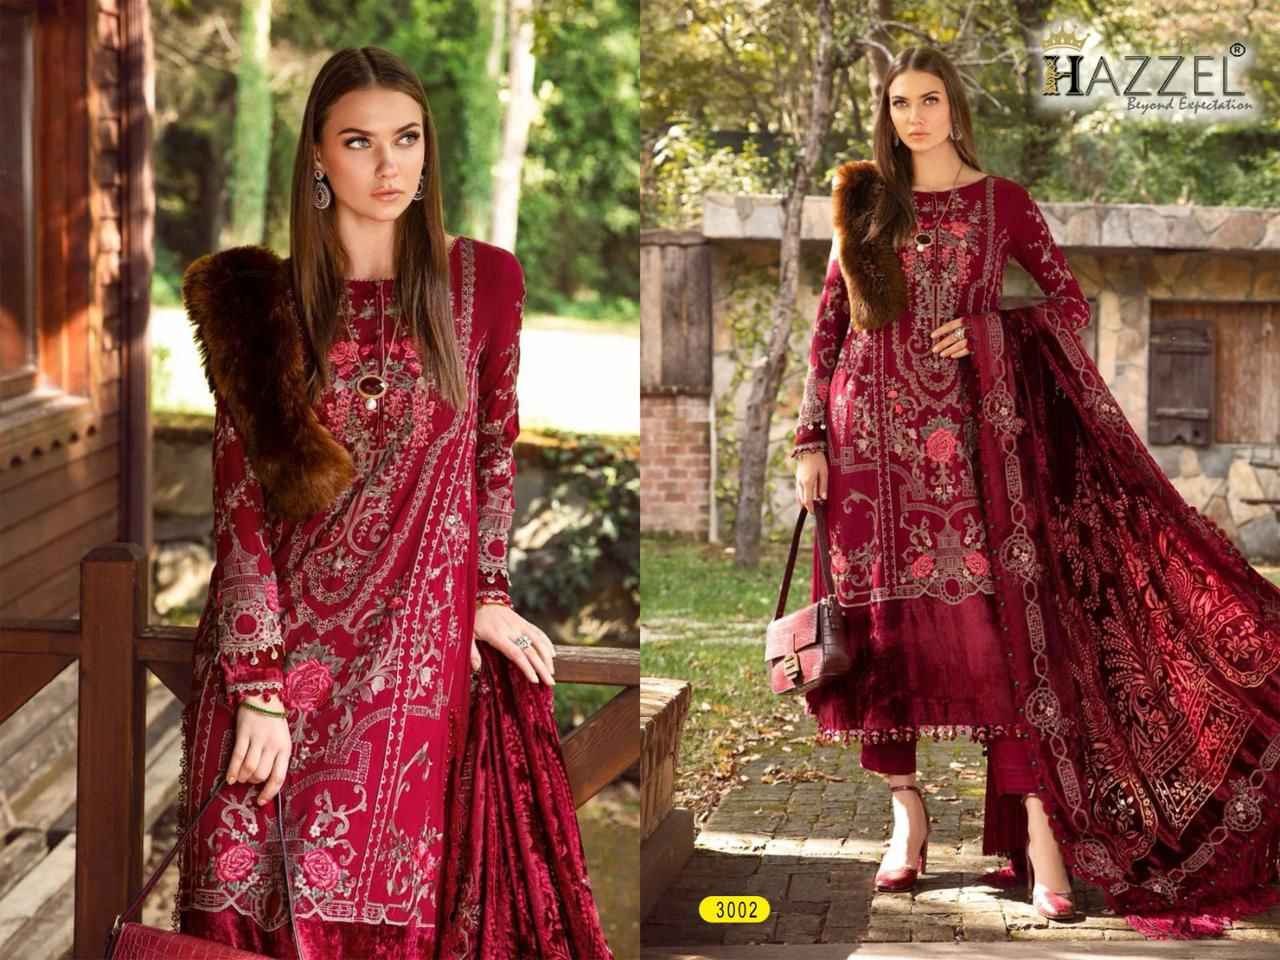 Hazzel Print Maria B Embroidered Vol-24 Rayon Cotton Dress Material (4 Pc Catalog)